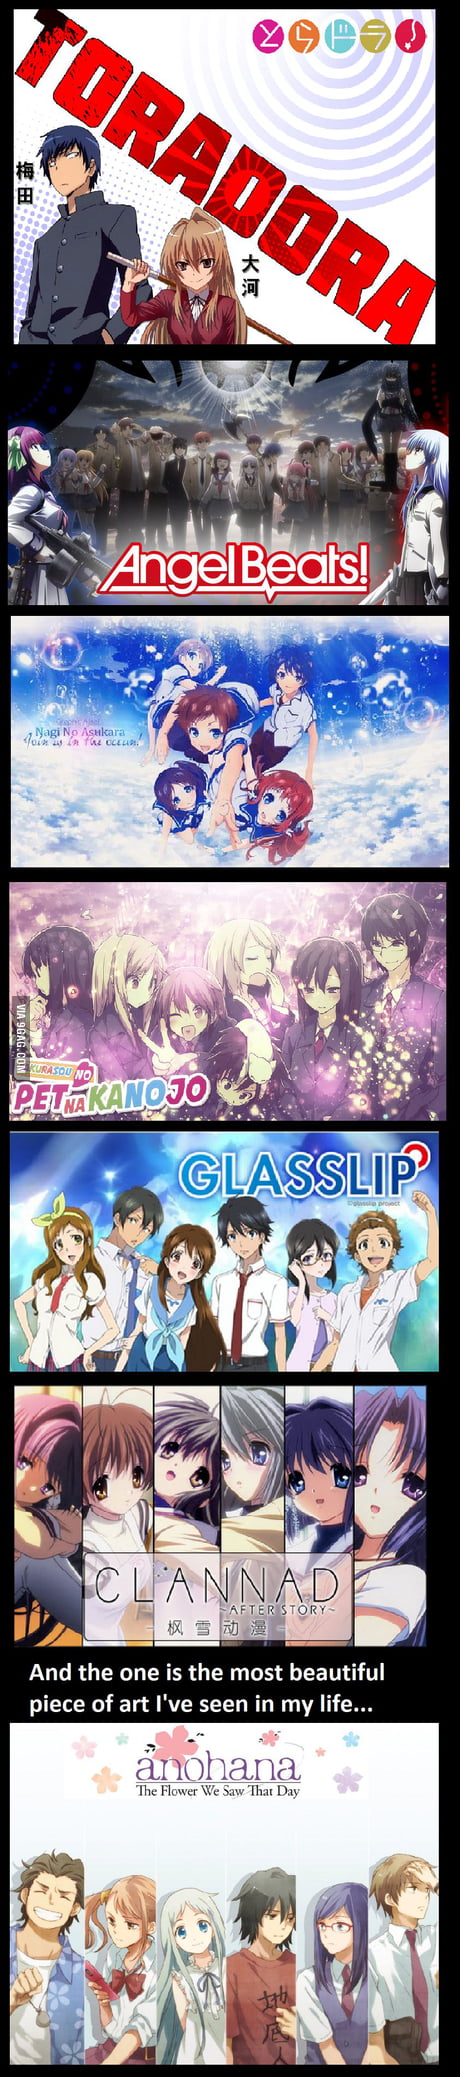 My personal list of anime that will make you cry. - 9GAG